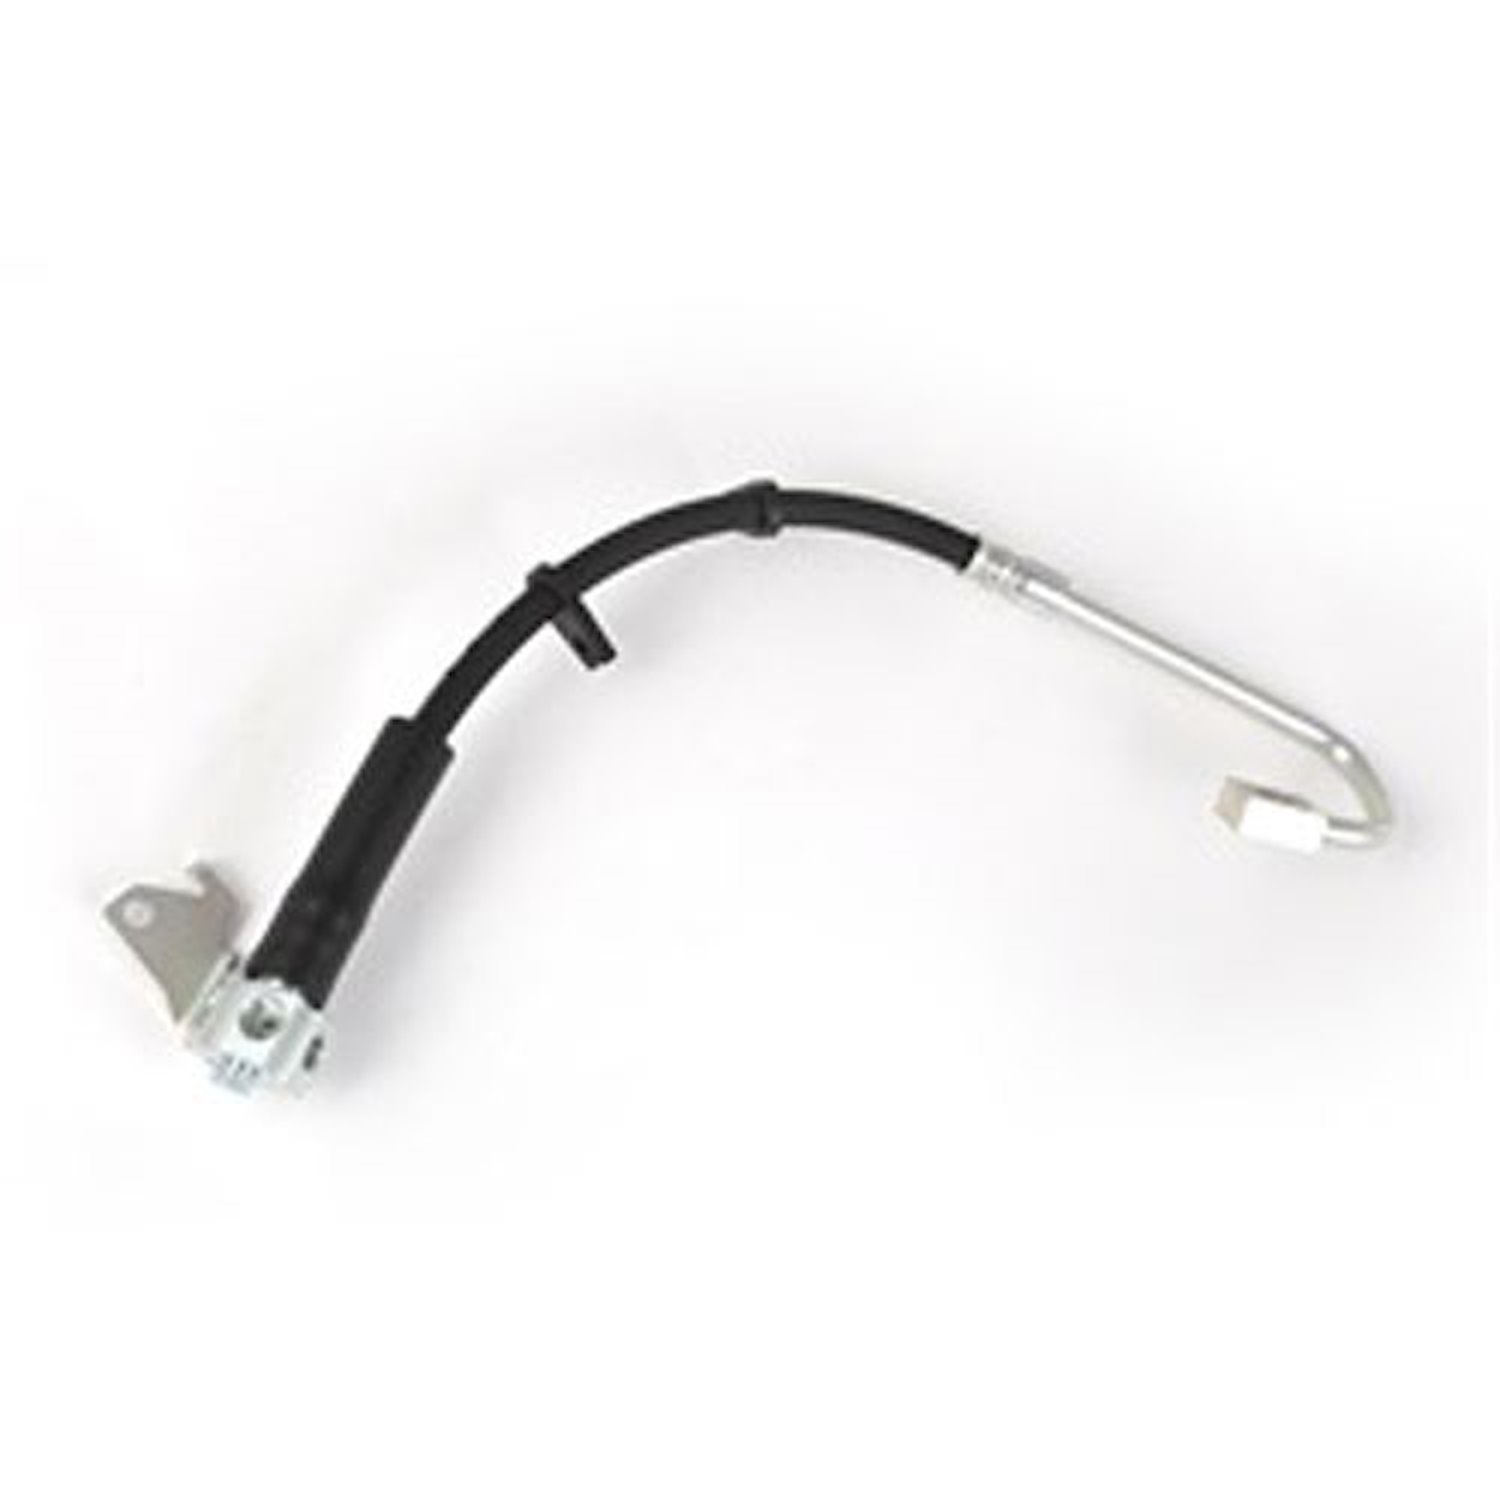 This left rear brake hose from Omix-ADA fits 05-10 Jeep Grand Cherokees SRT8s and 06-10 Commanders with disc brakes.